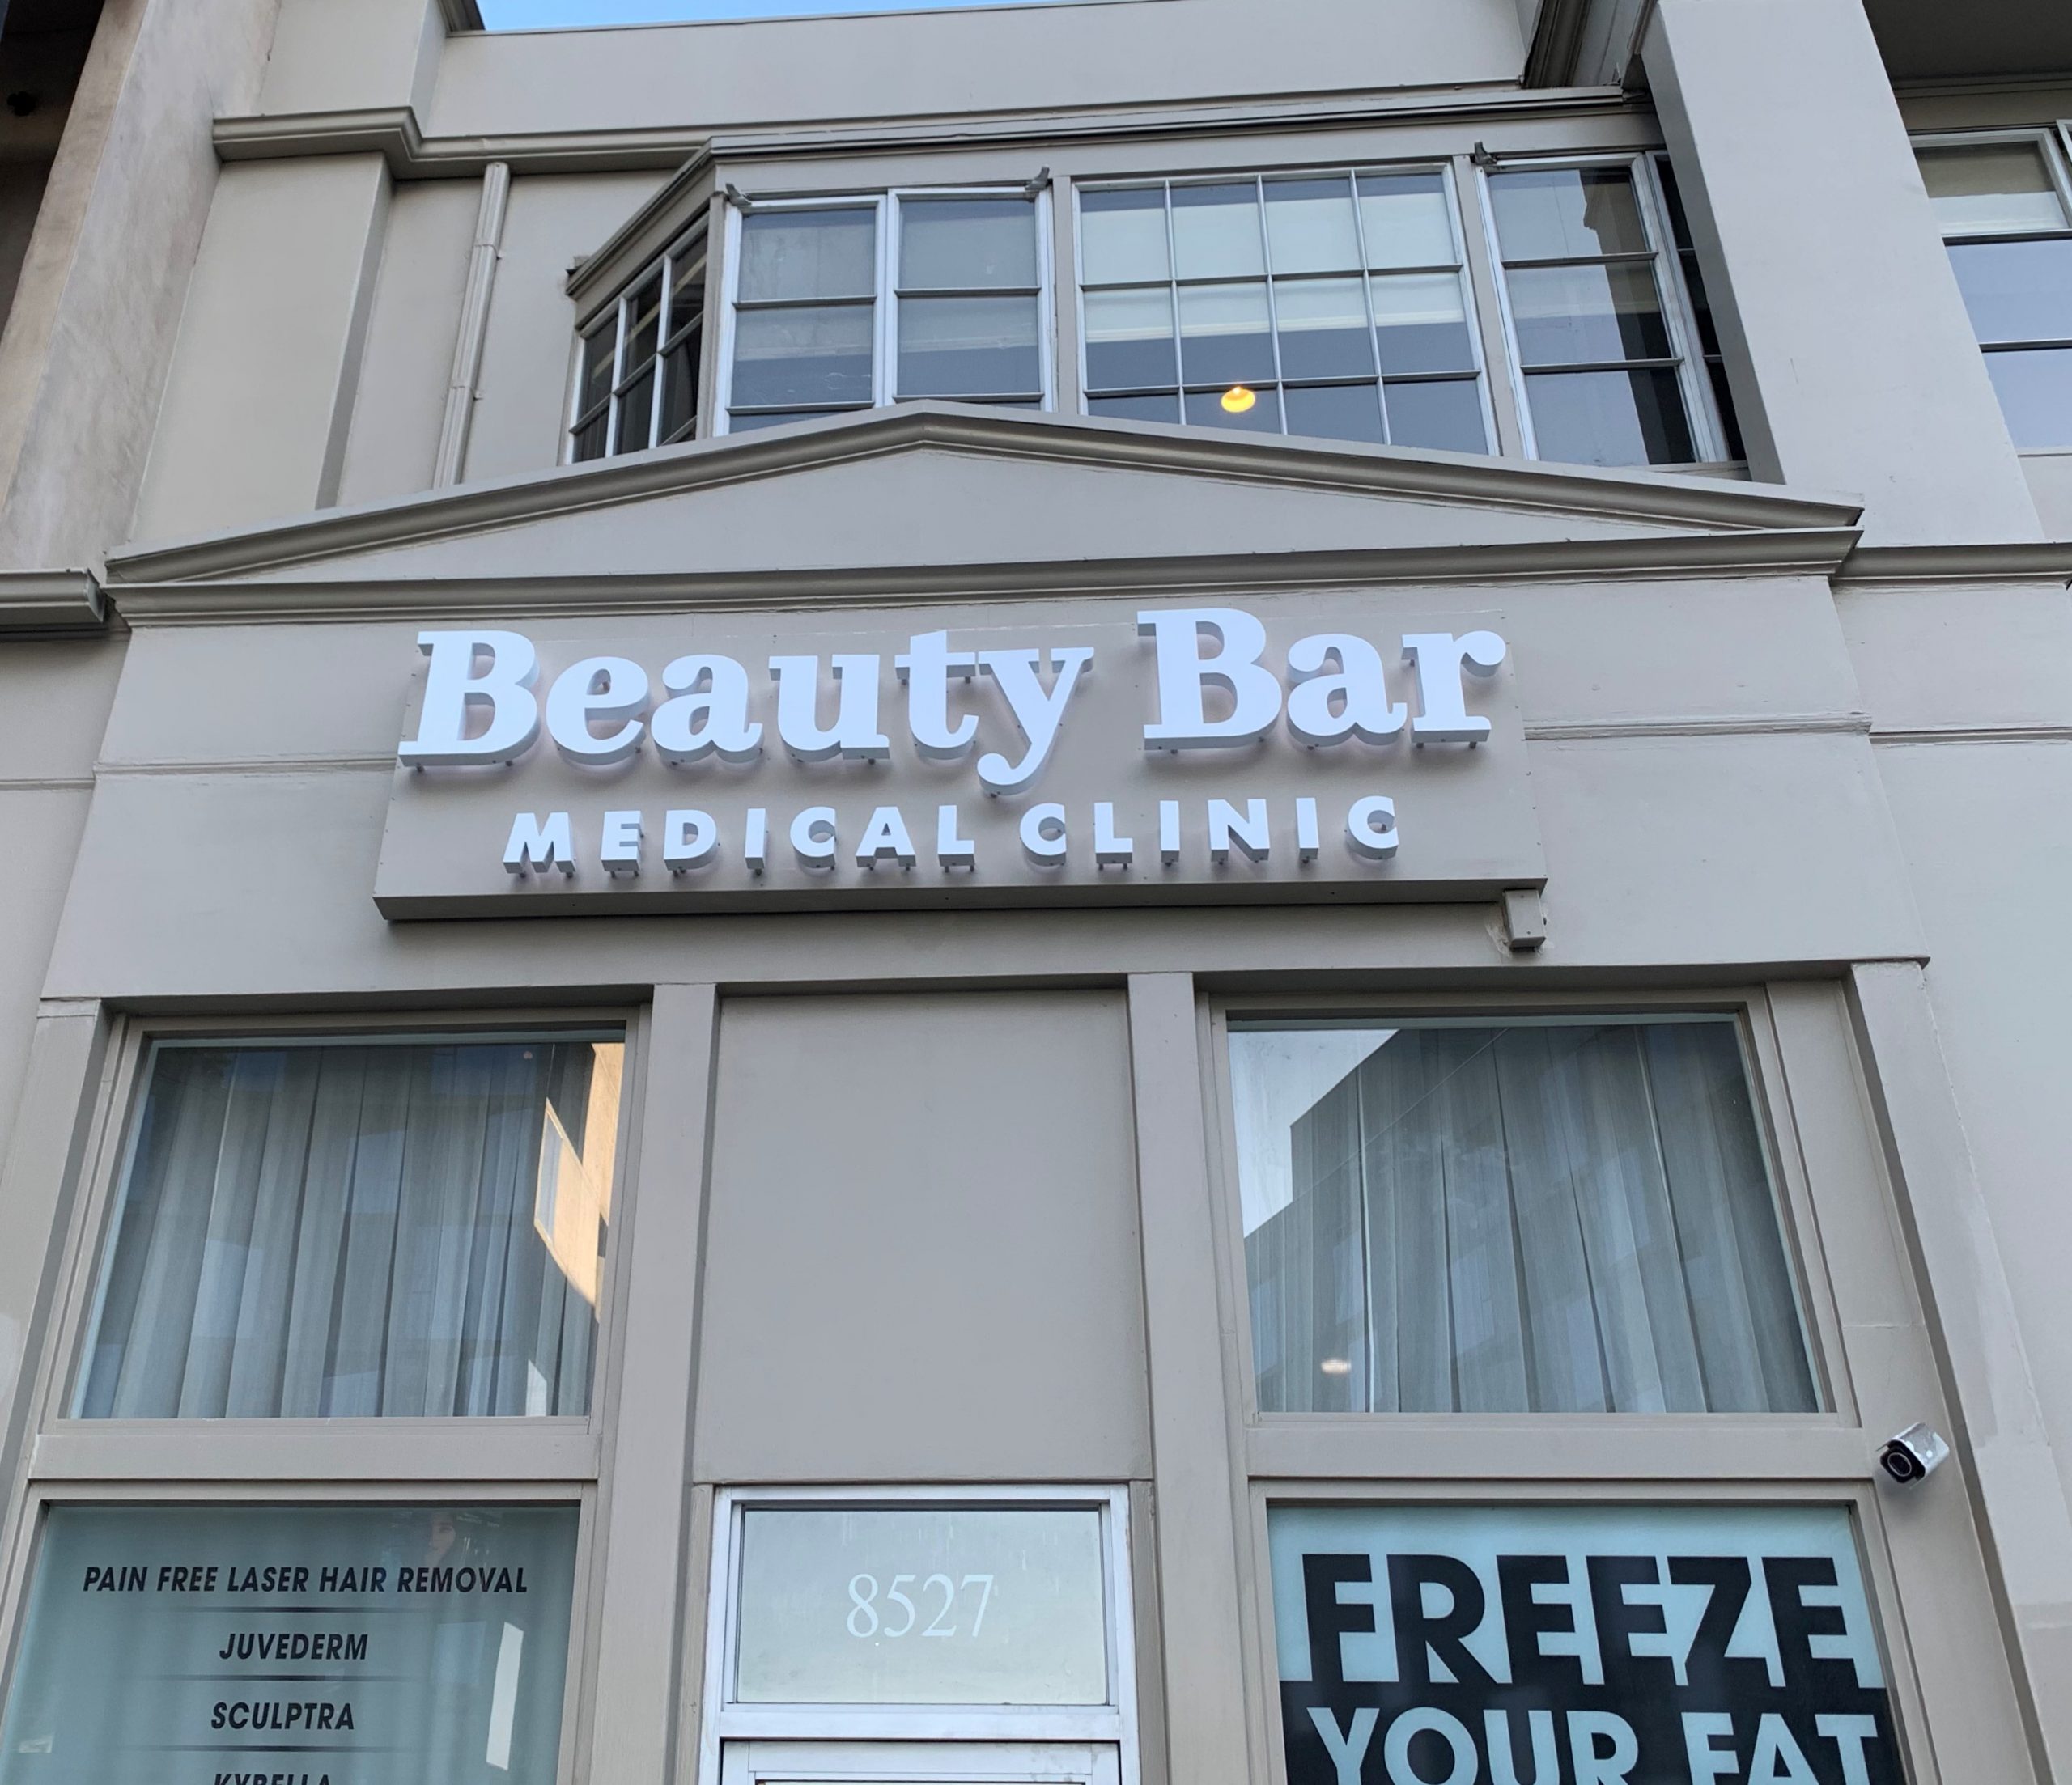 A beauty clinic in Hollywood needs signage that impresses. Such as these backlit channel letters for Beauty Bar Medical Clinic in West Hollywood.